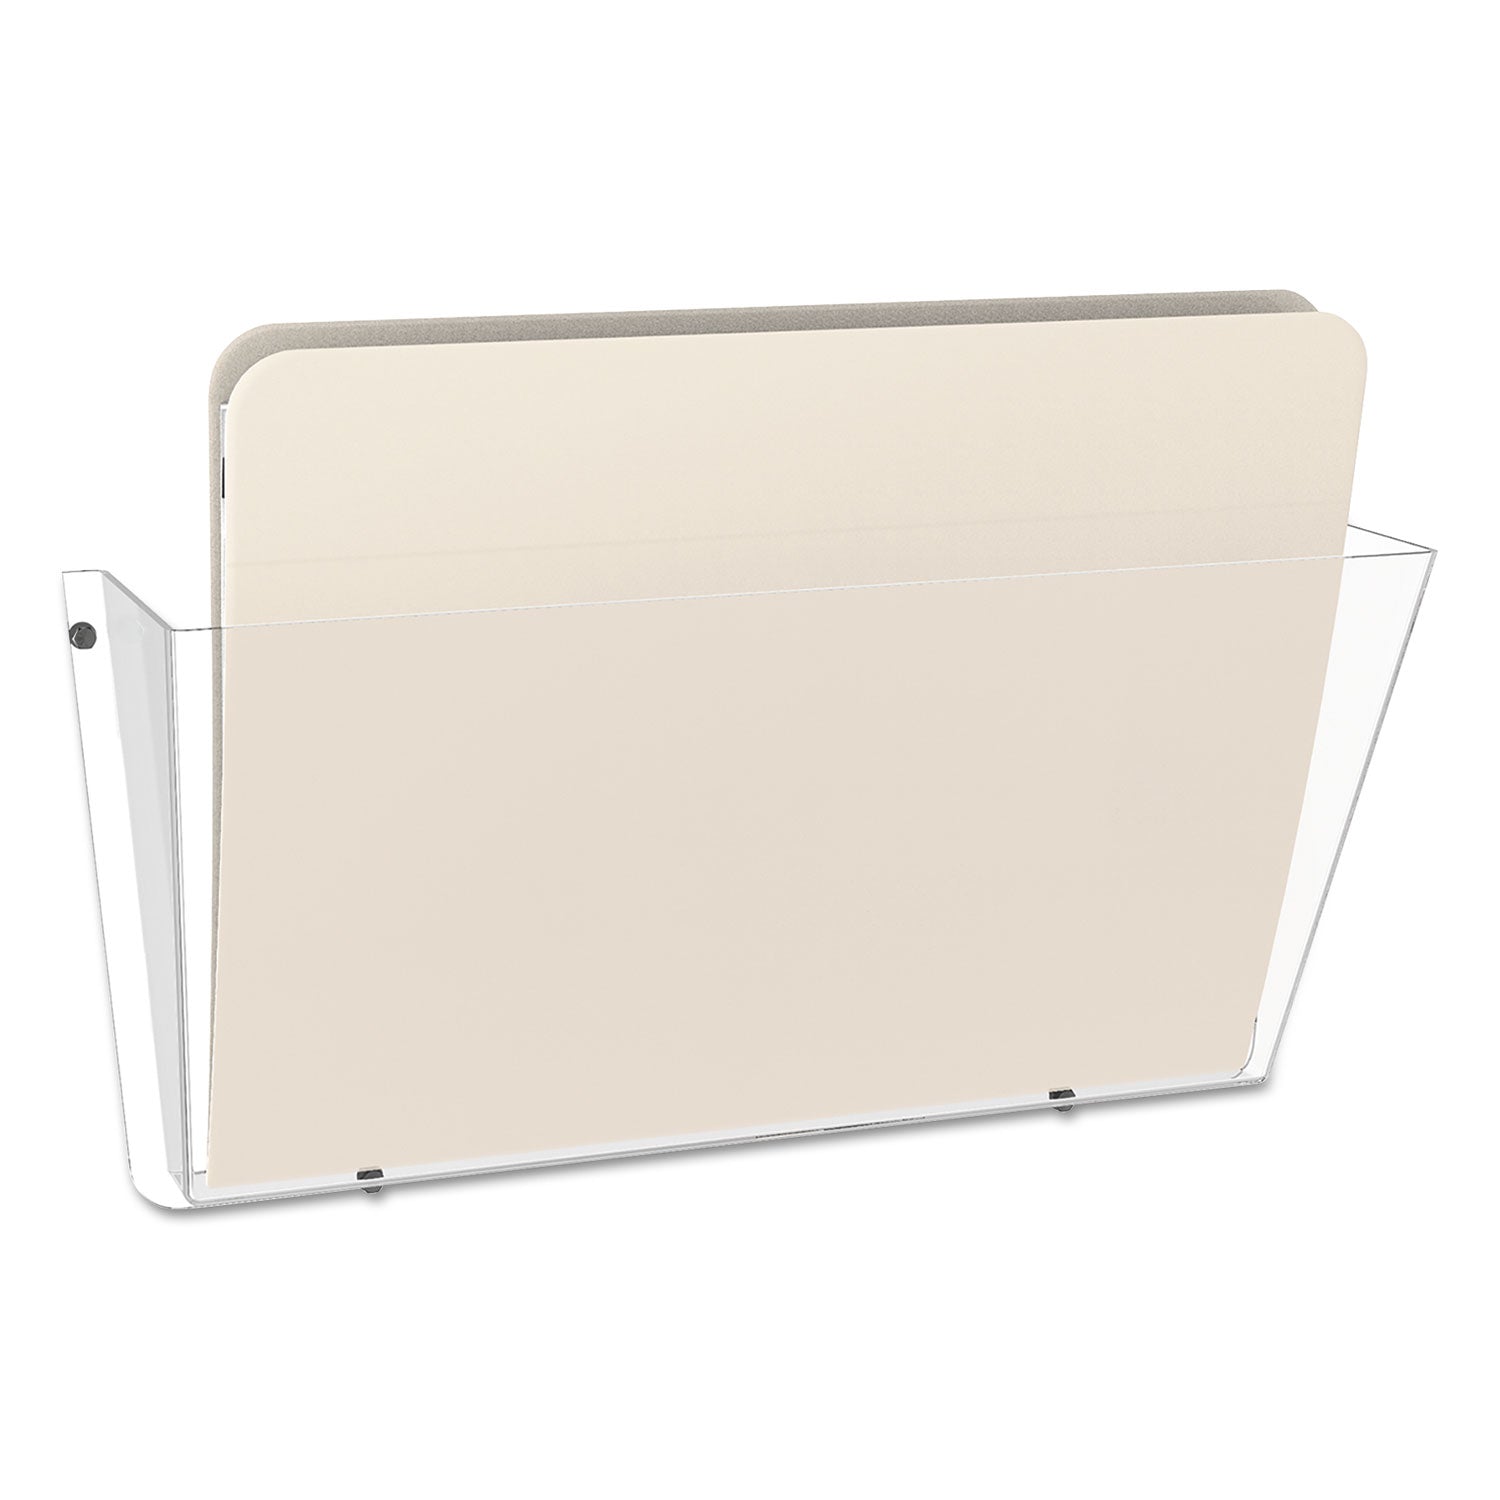 Unbreakable DocuPocket Wall File, Letter Size, 14.5" x 3" x 6.5", Clear - 